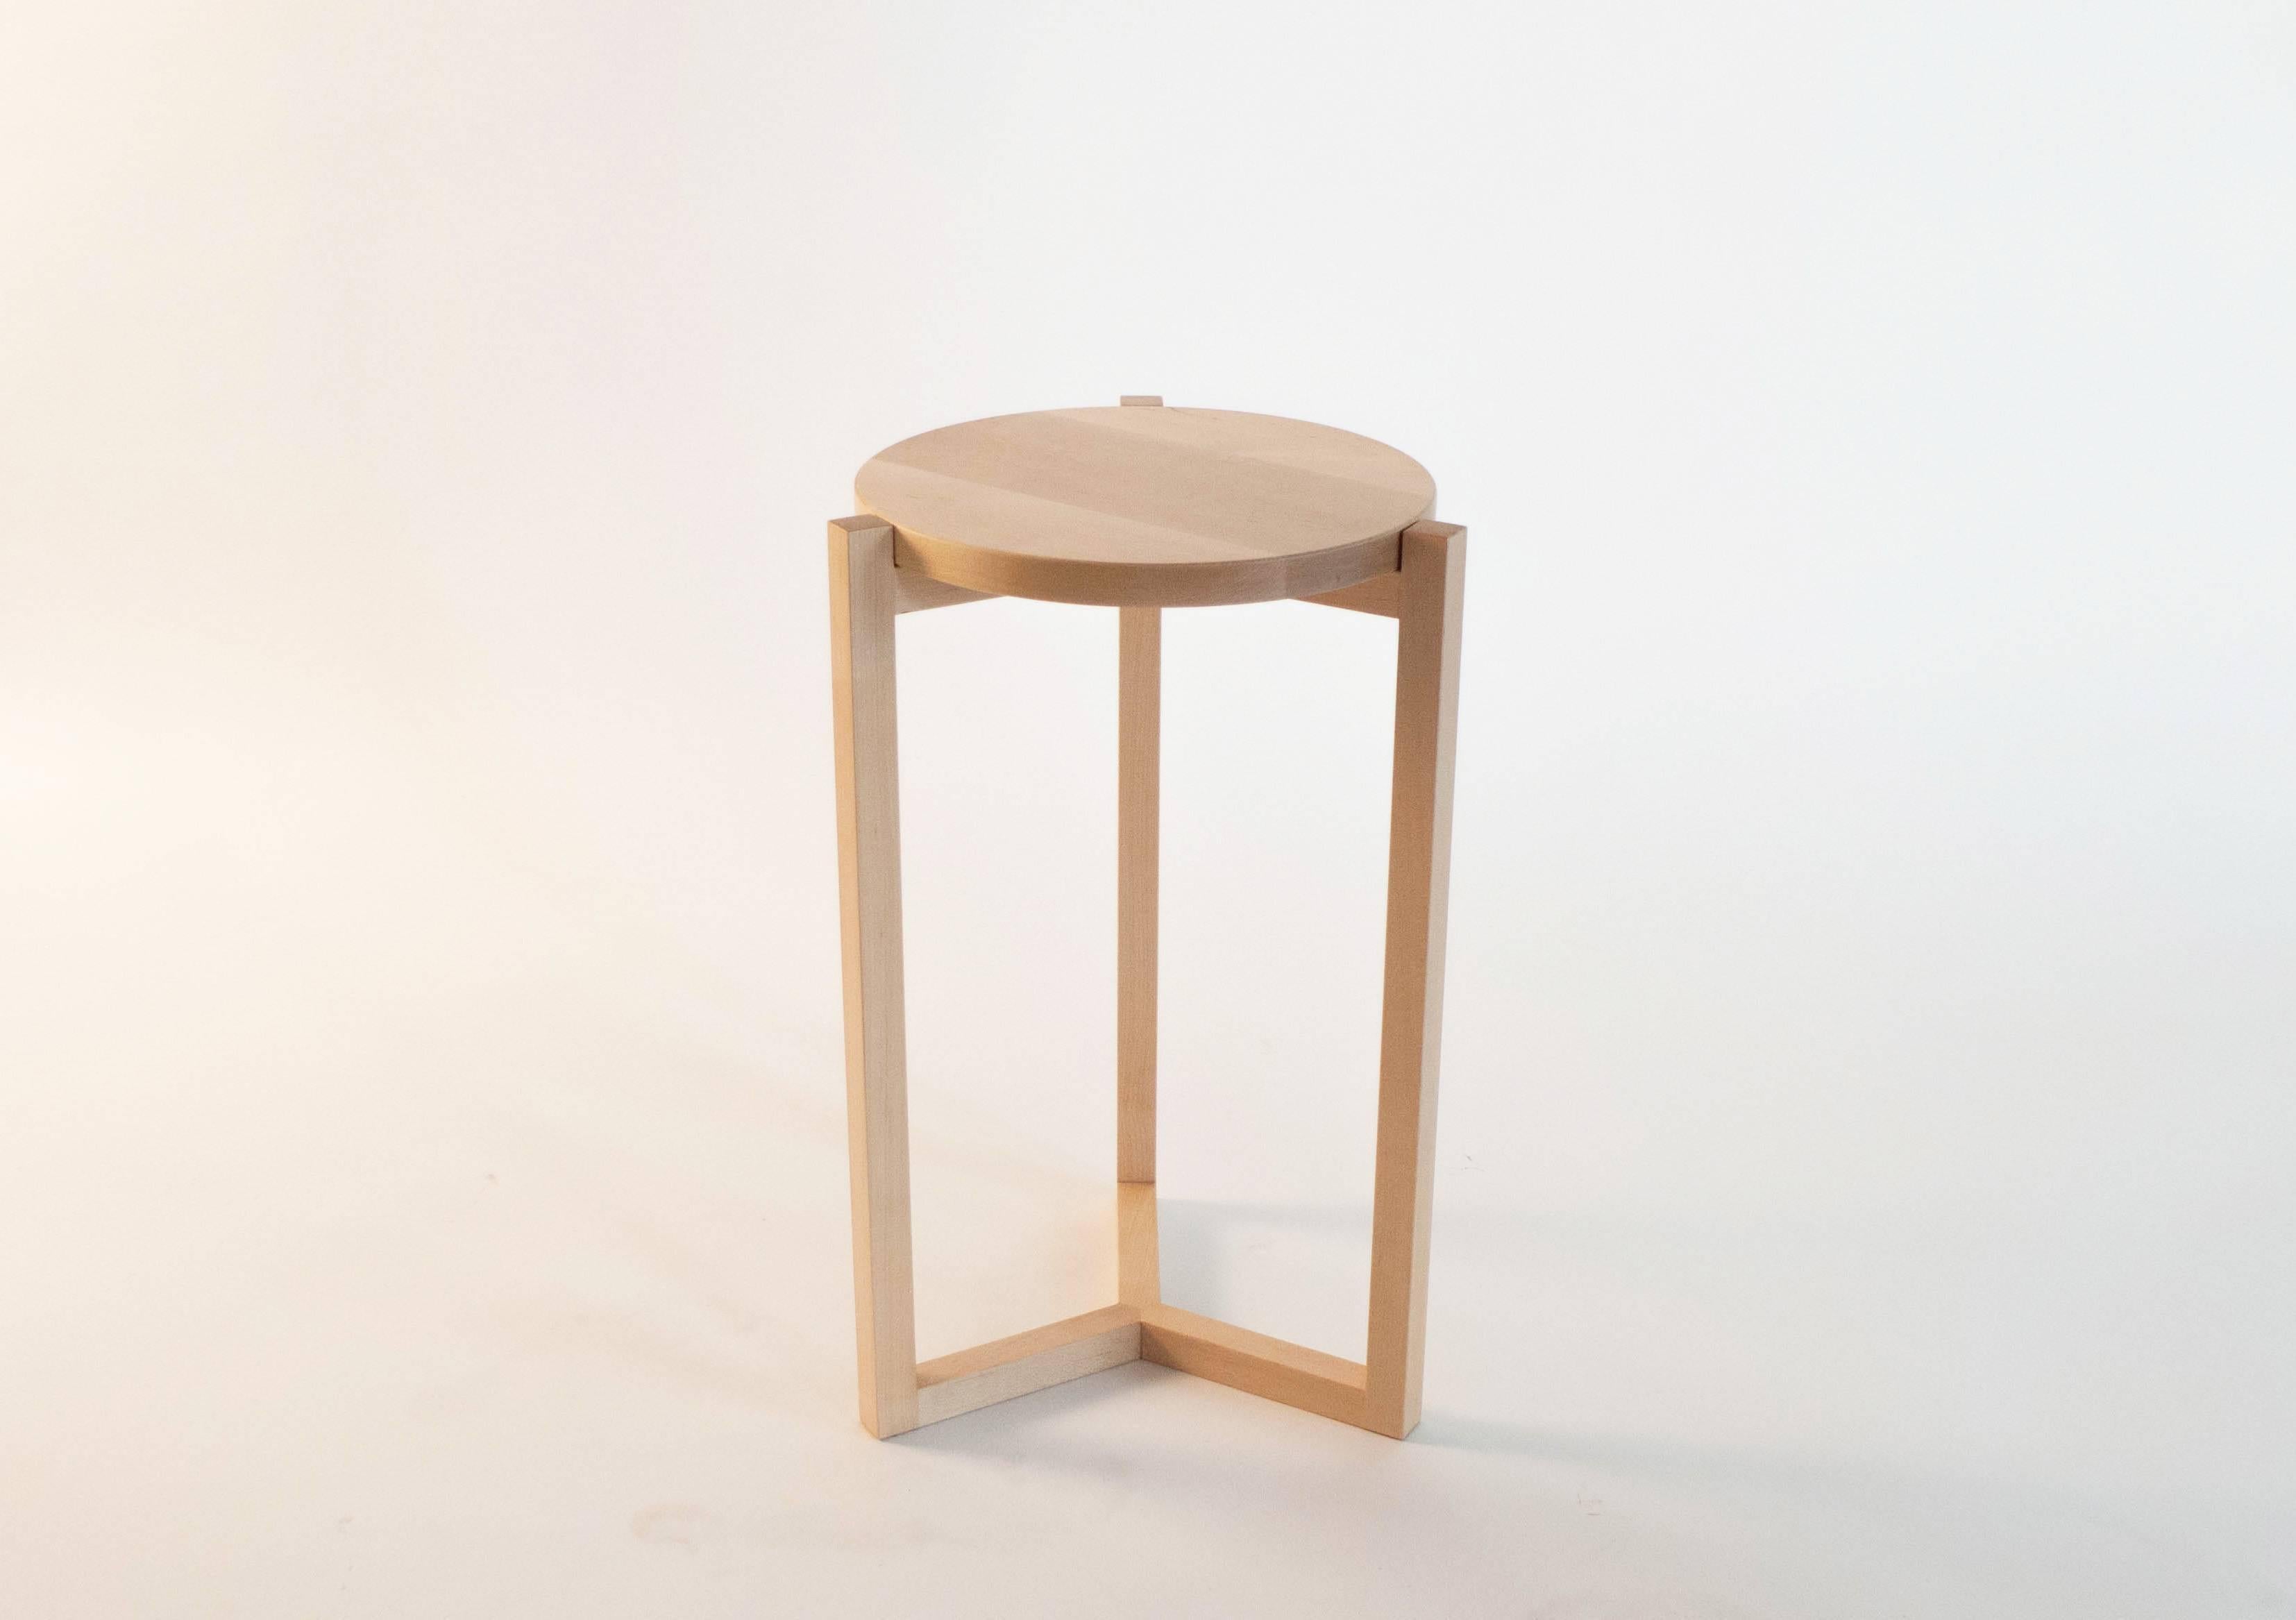 The Felix side table is built in our Brooklyn studio using premium hardwoods. The three legged design showcases a unique Silhouette from any angle, and the three way miter joint provides a functional detail at the base.

Made of solid wood, hand